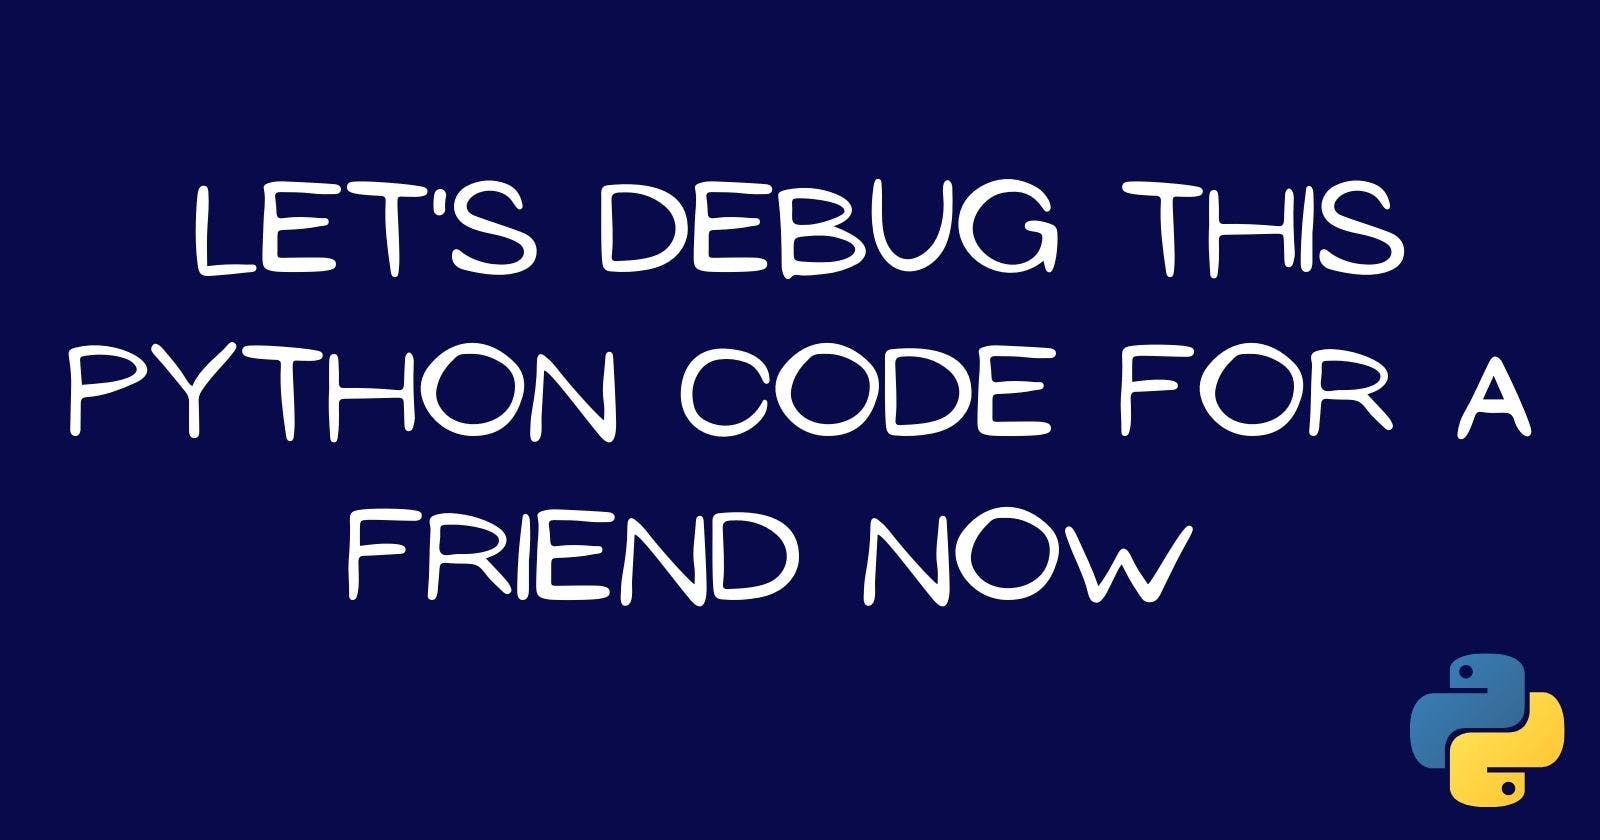 Let's Debug this Python Code for a Friend Now